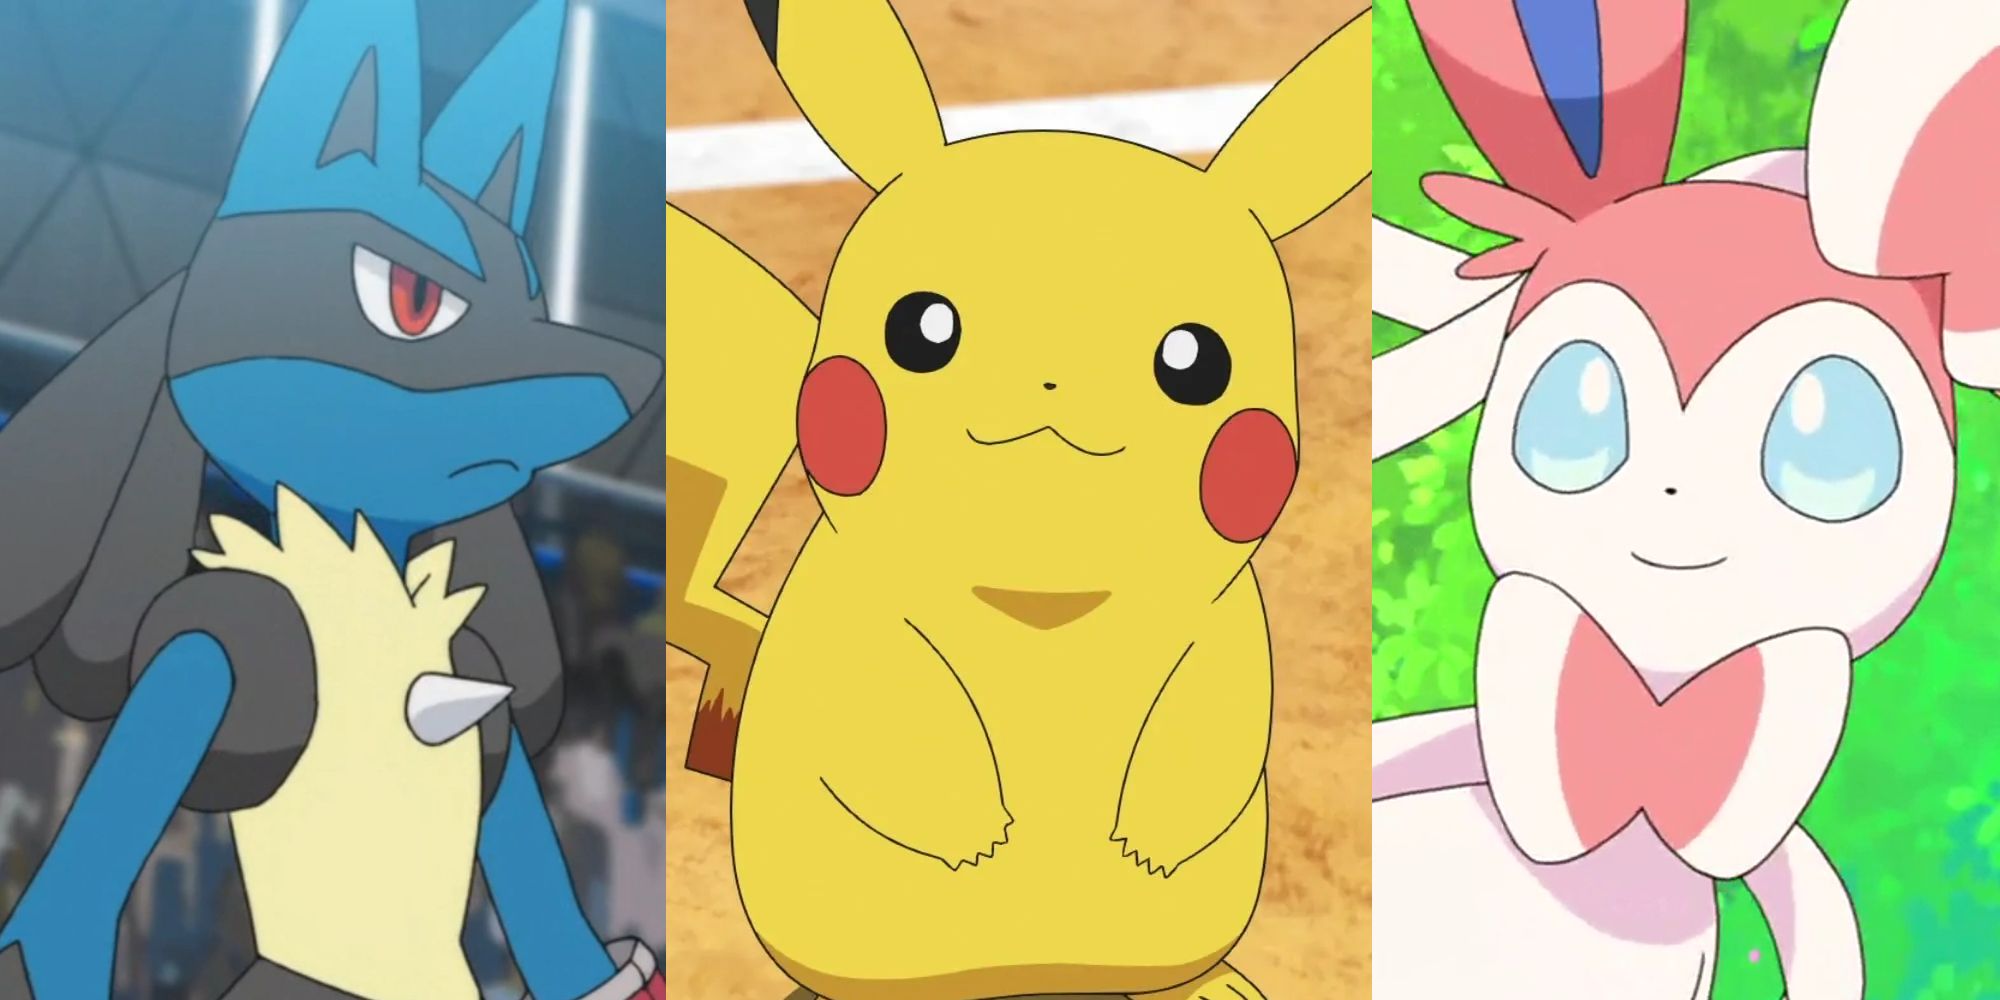 Lucario in a stadium; Pikachu smiling; Sylveon in a field